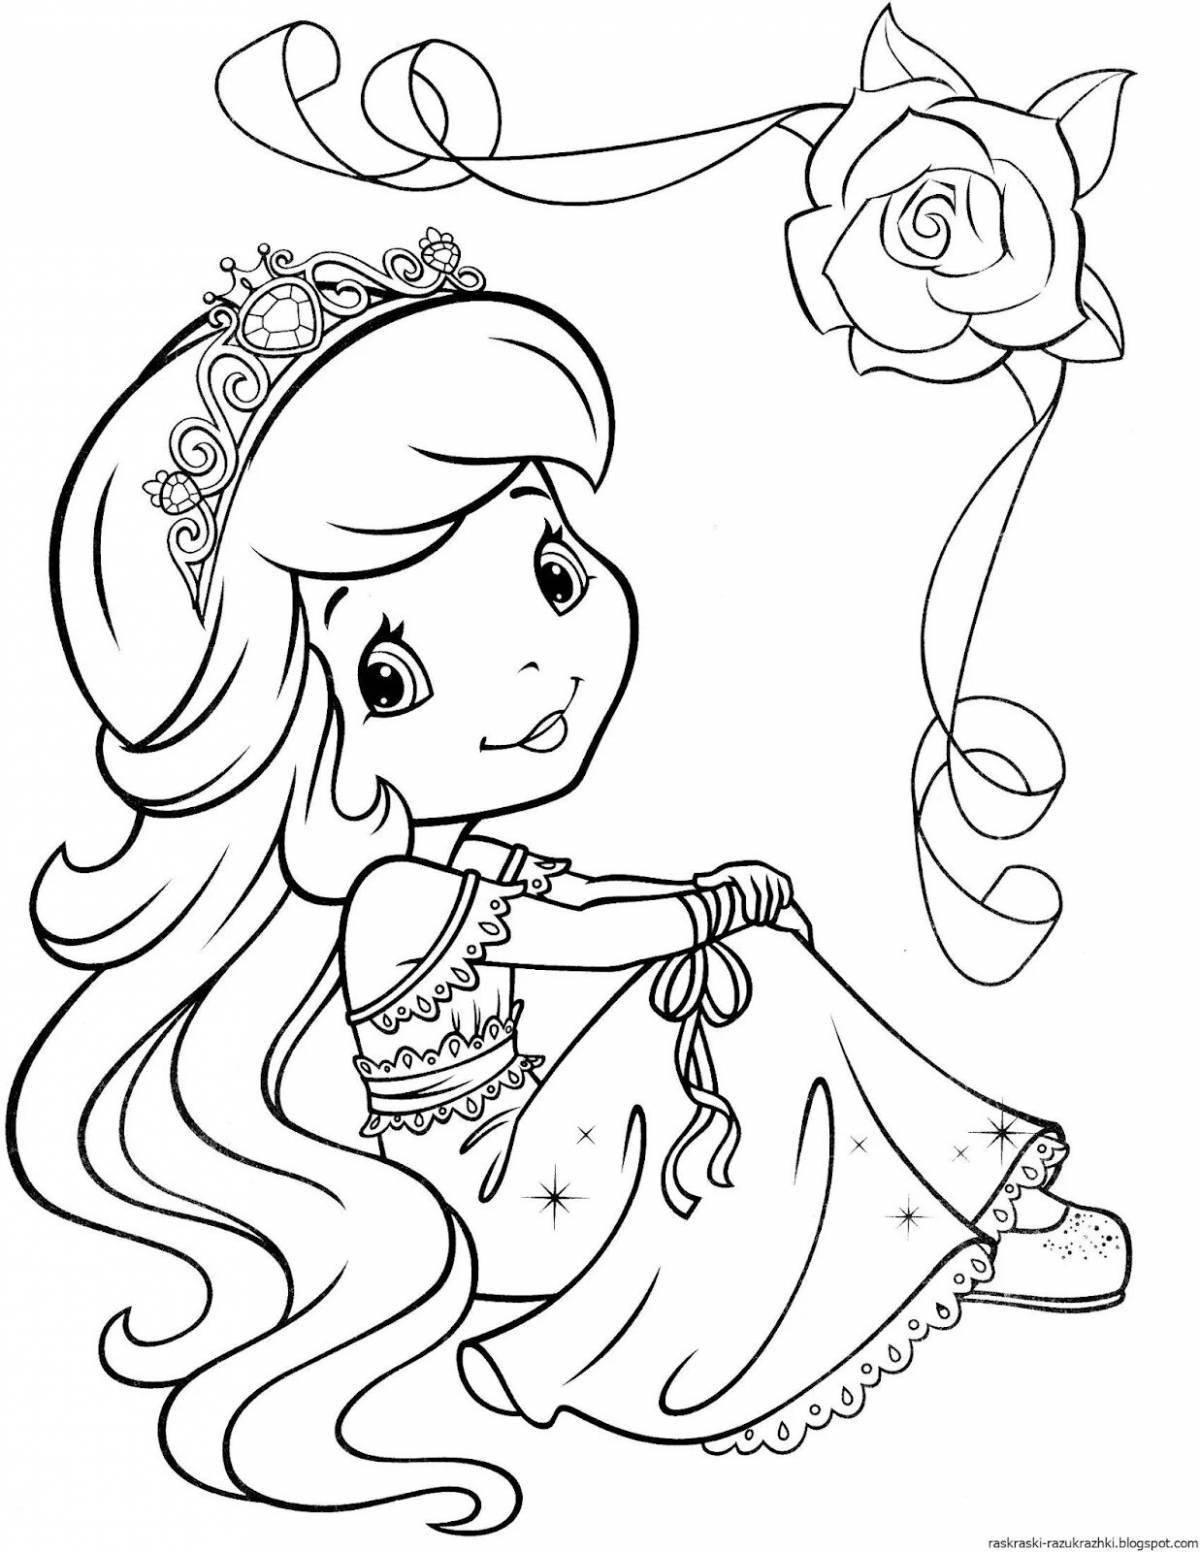 Great coloring book in e language for girls